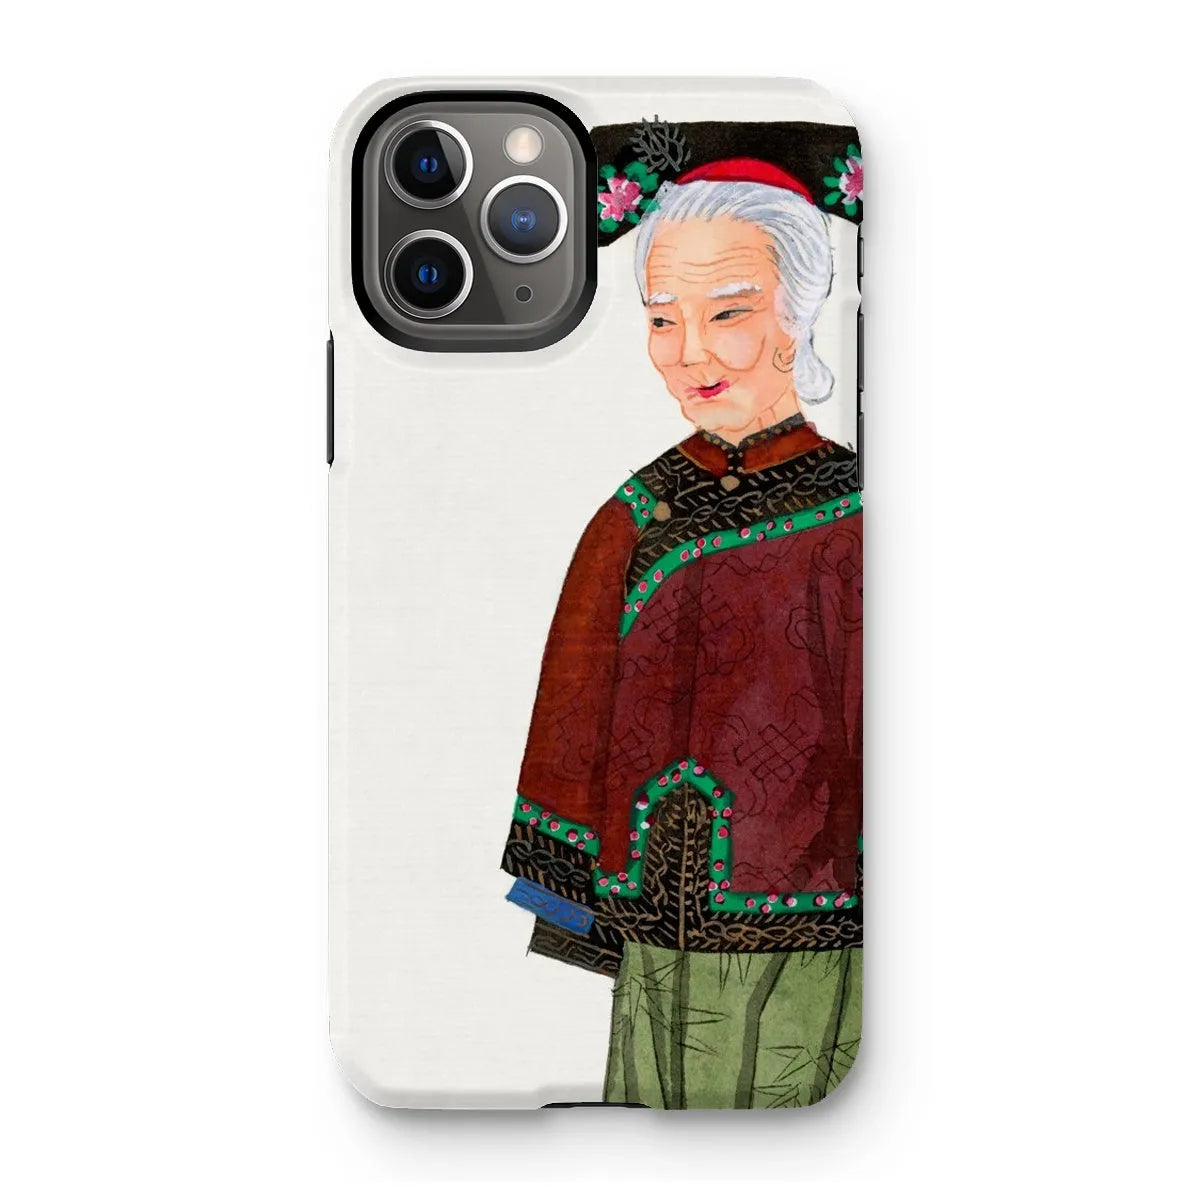 Grand Dame Too - Aesthetic Chinese Art Phone Case - Iphone 11 Pro / Matte - Mobile Phone Cases - Aesthetic Art